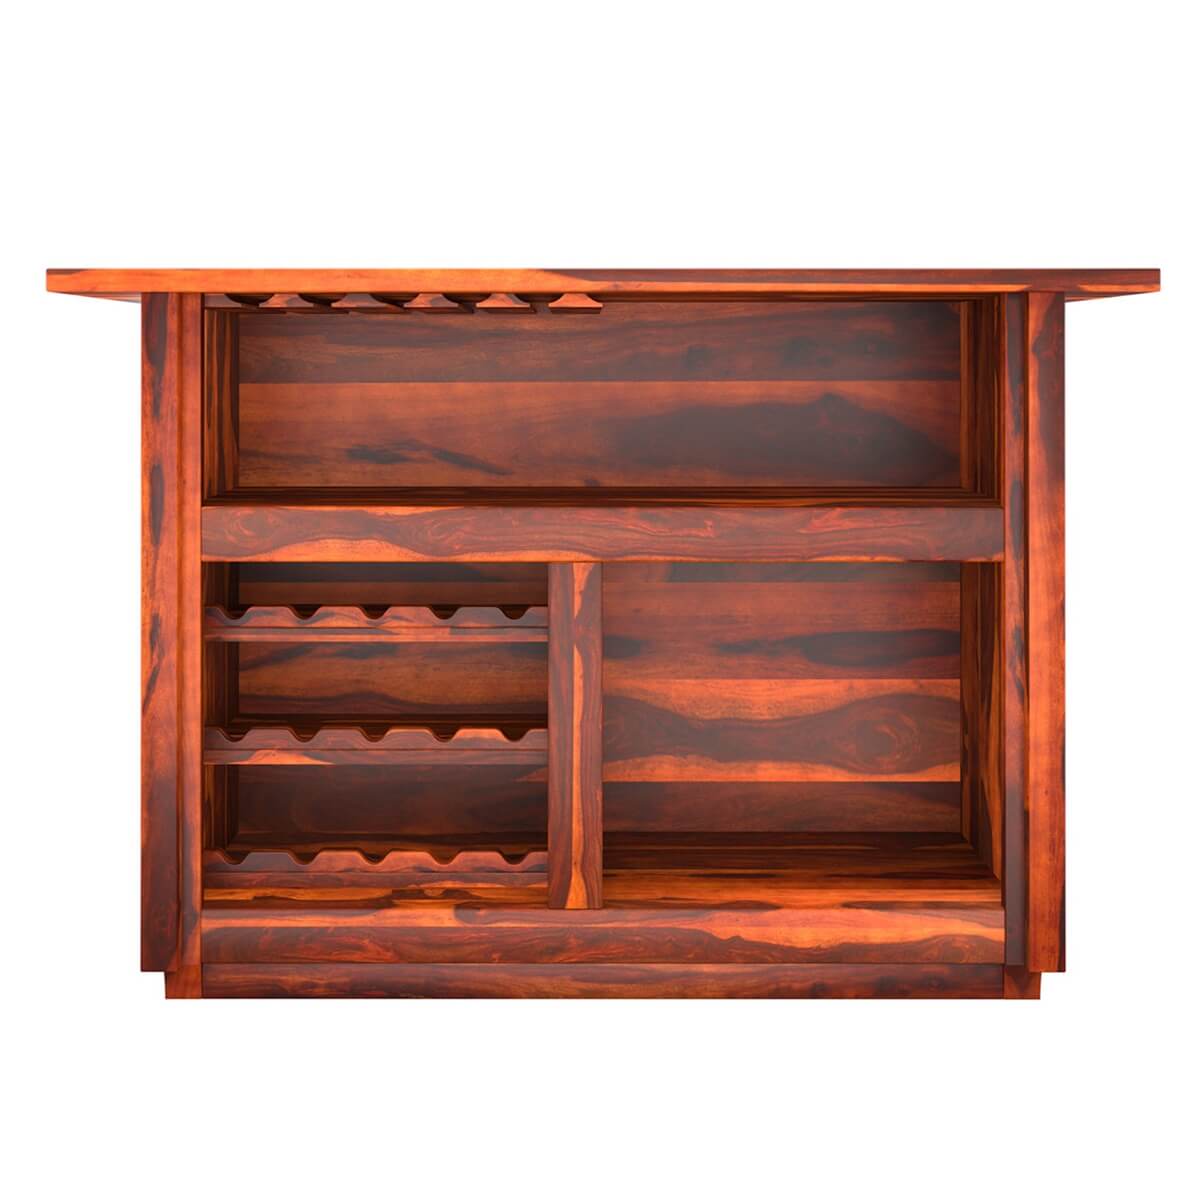 Lugano Solid Wood Rustic Wine Bar Table With Storage.